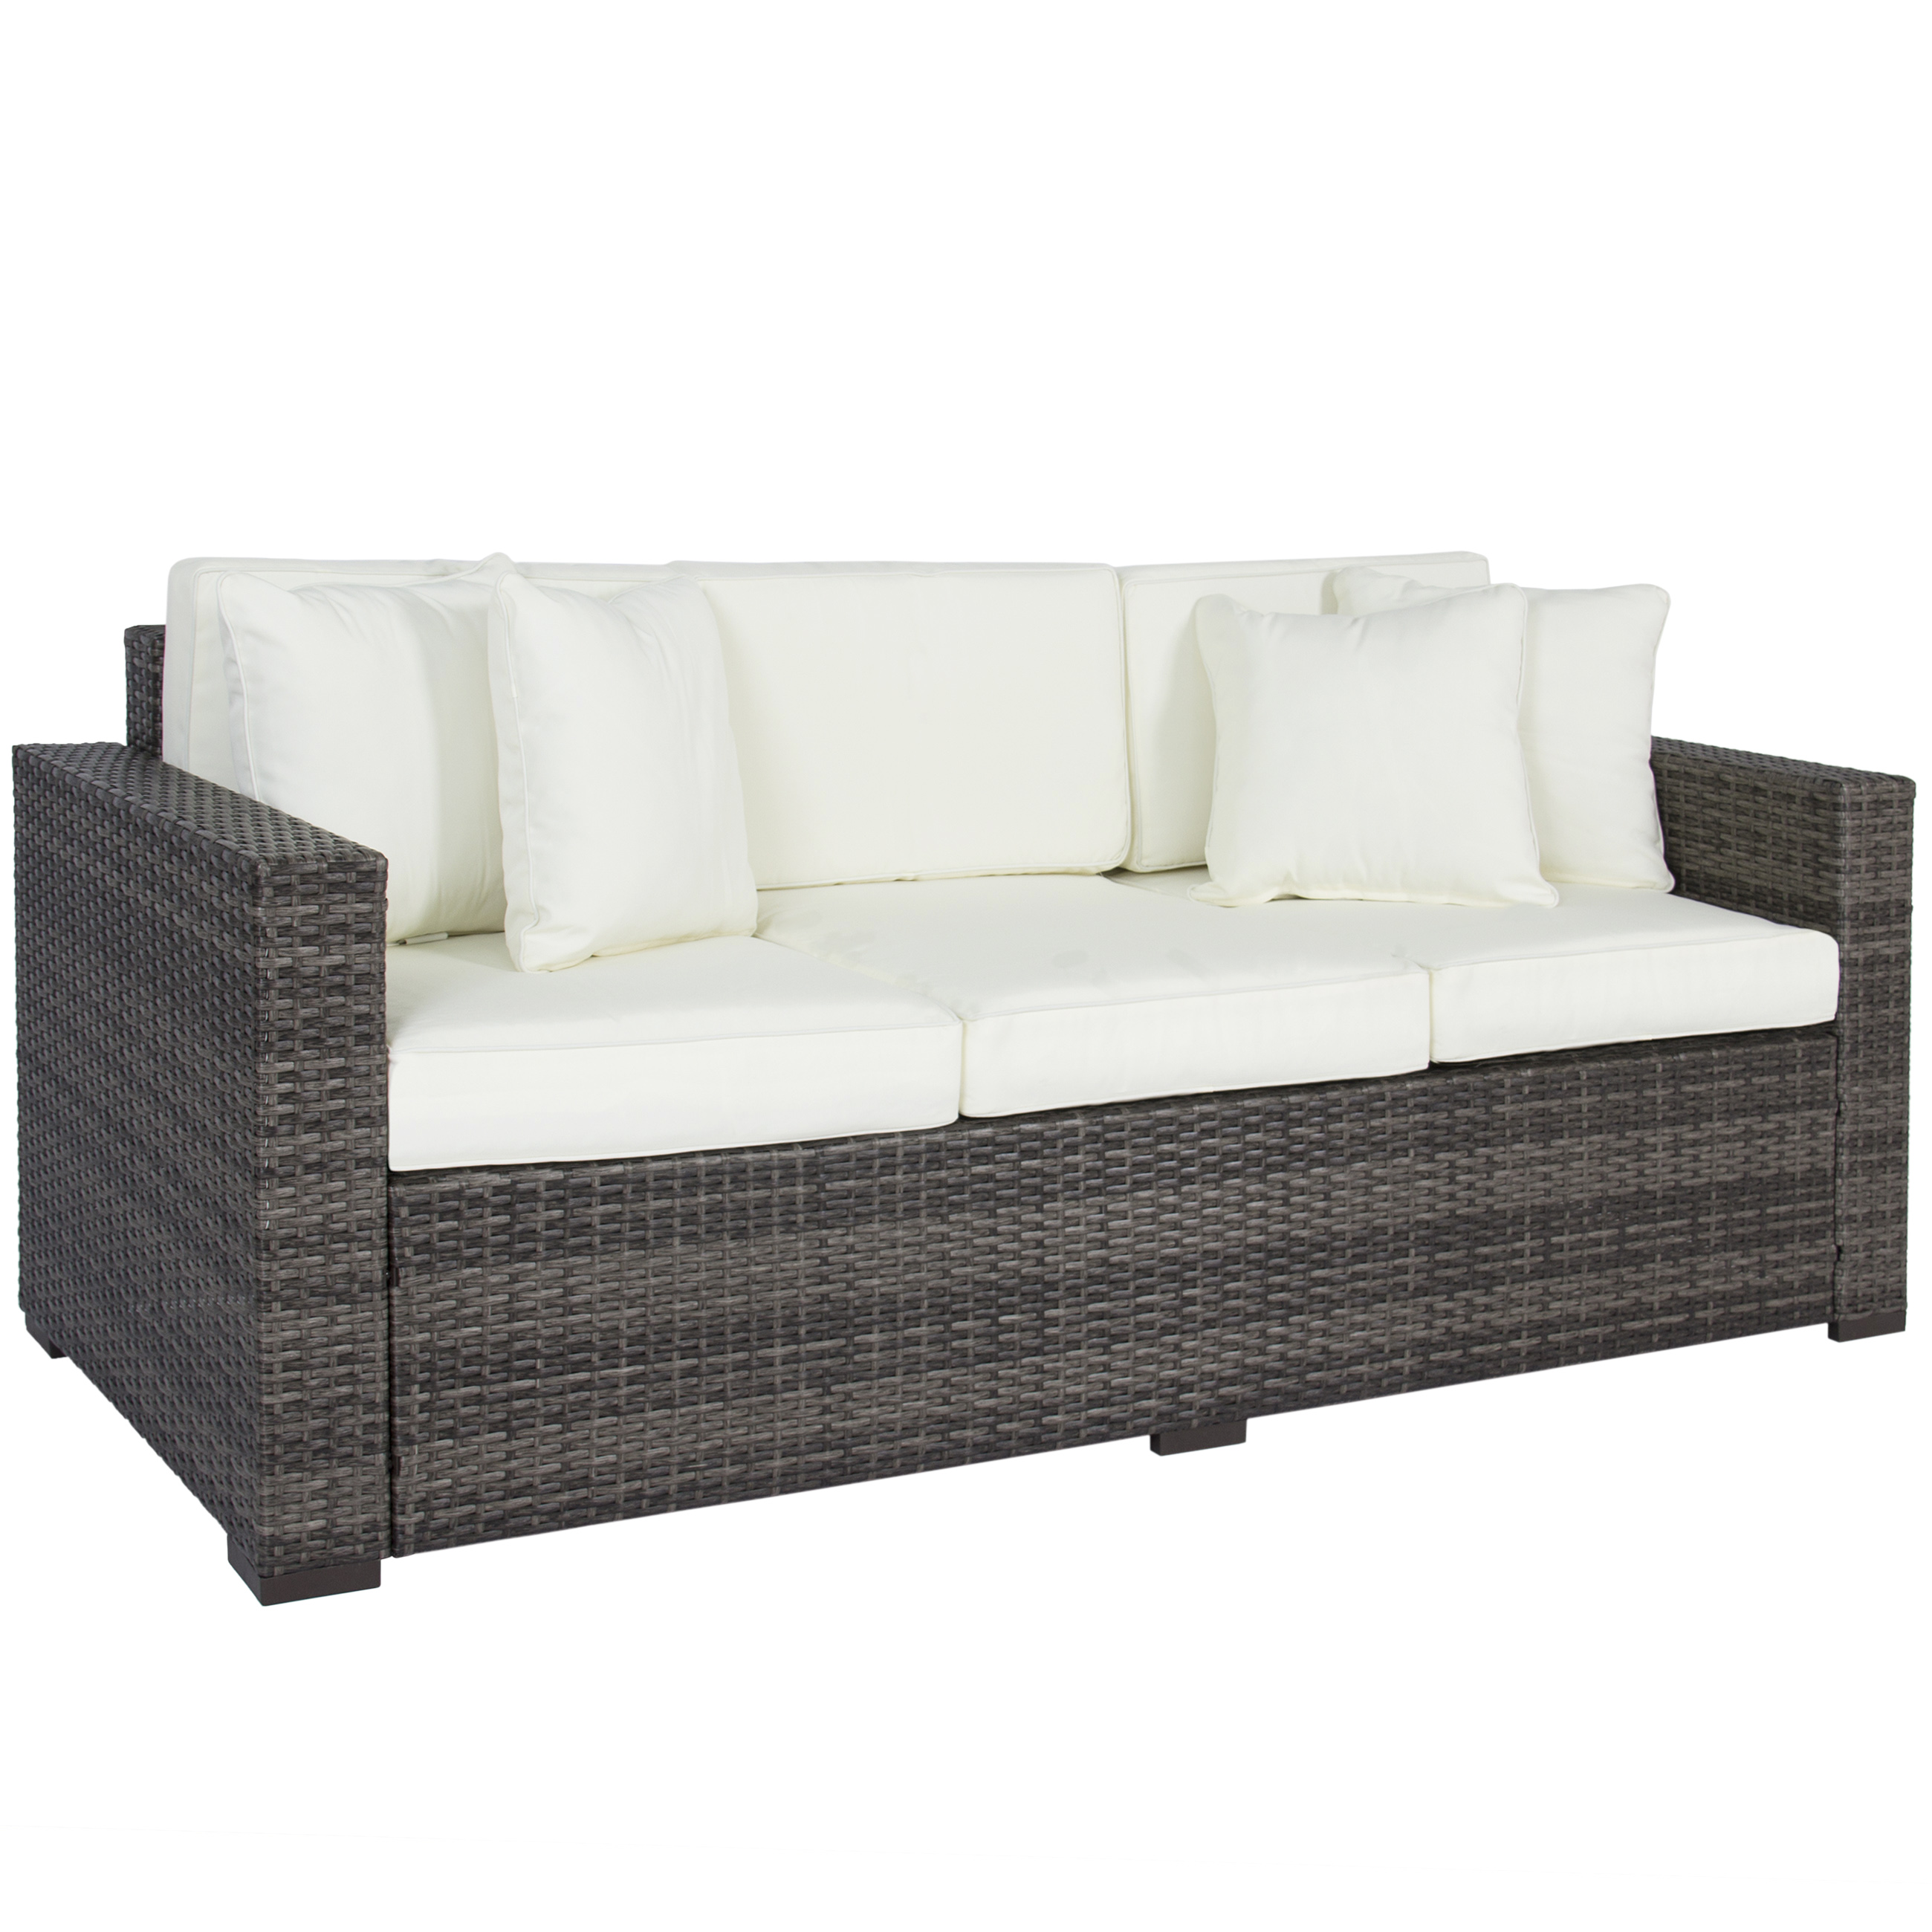 best choice products 3-seat outdoor wicker sofa couch patio furniture w/ HOWOLCY